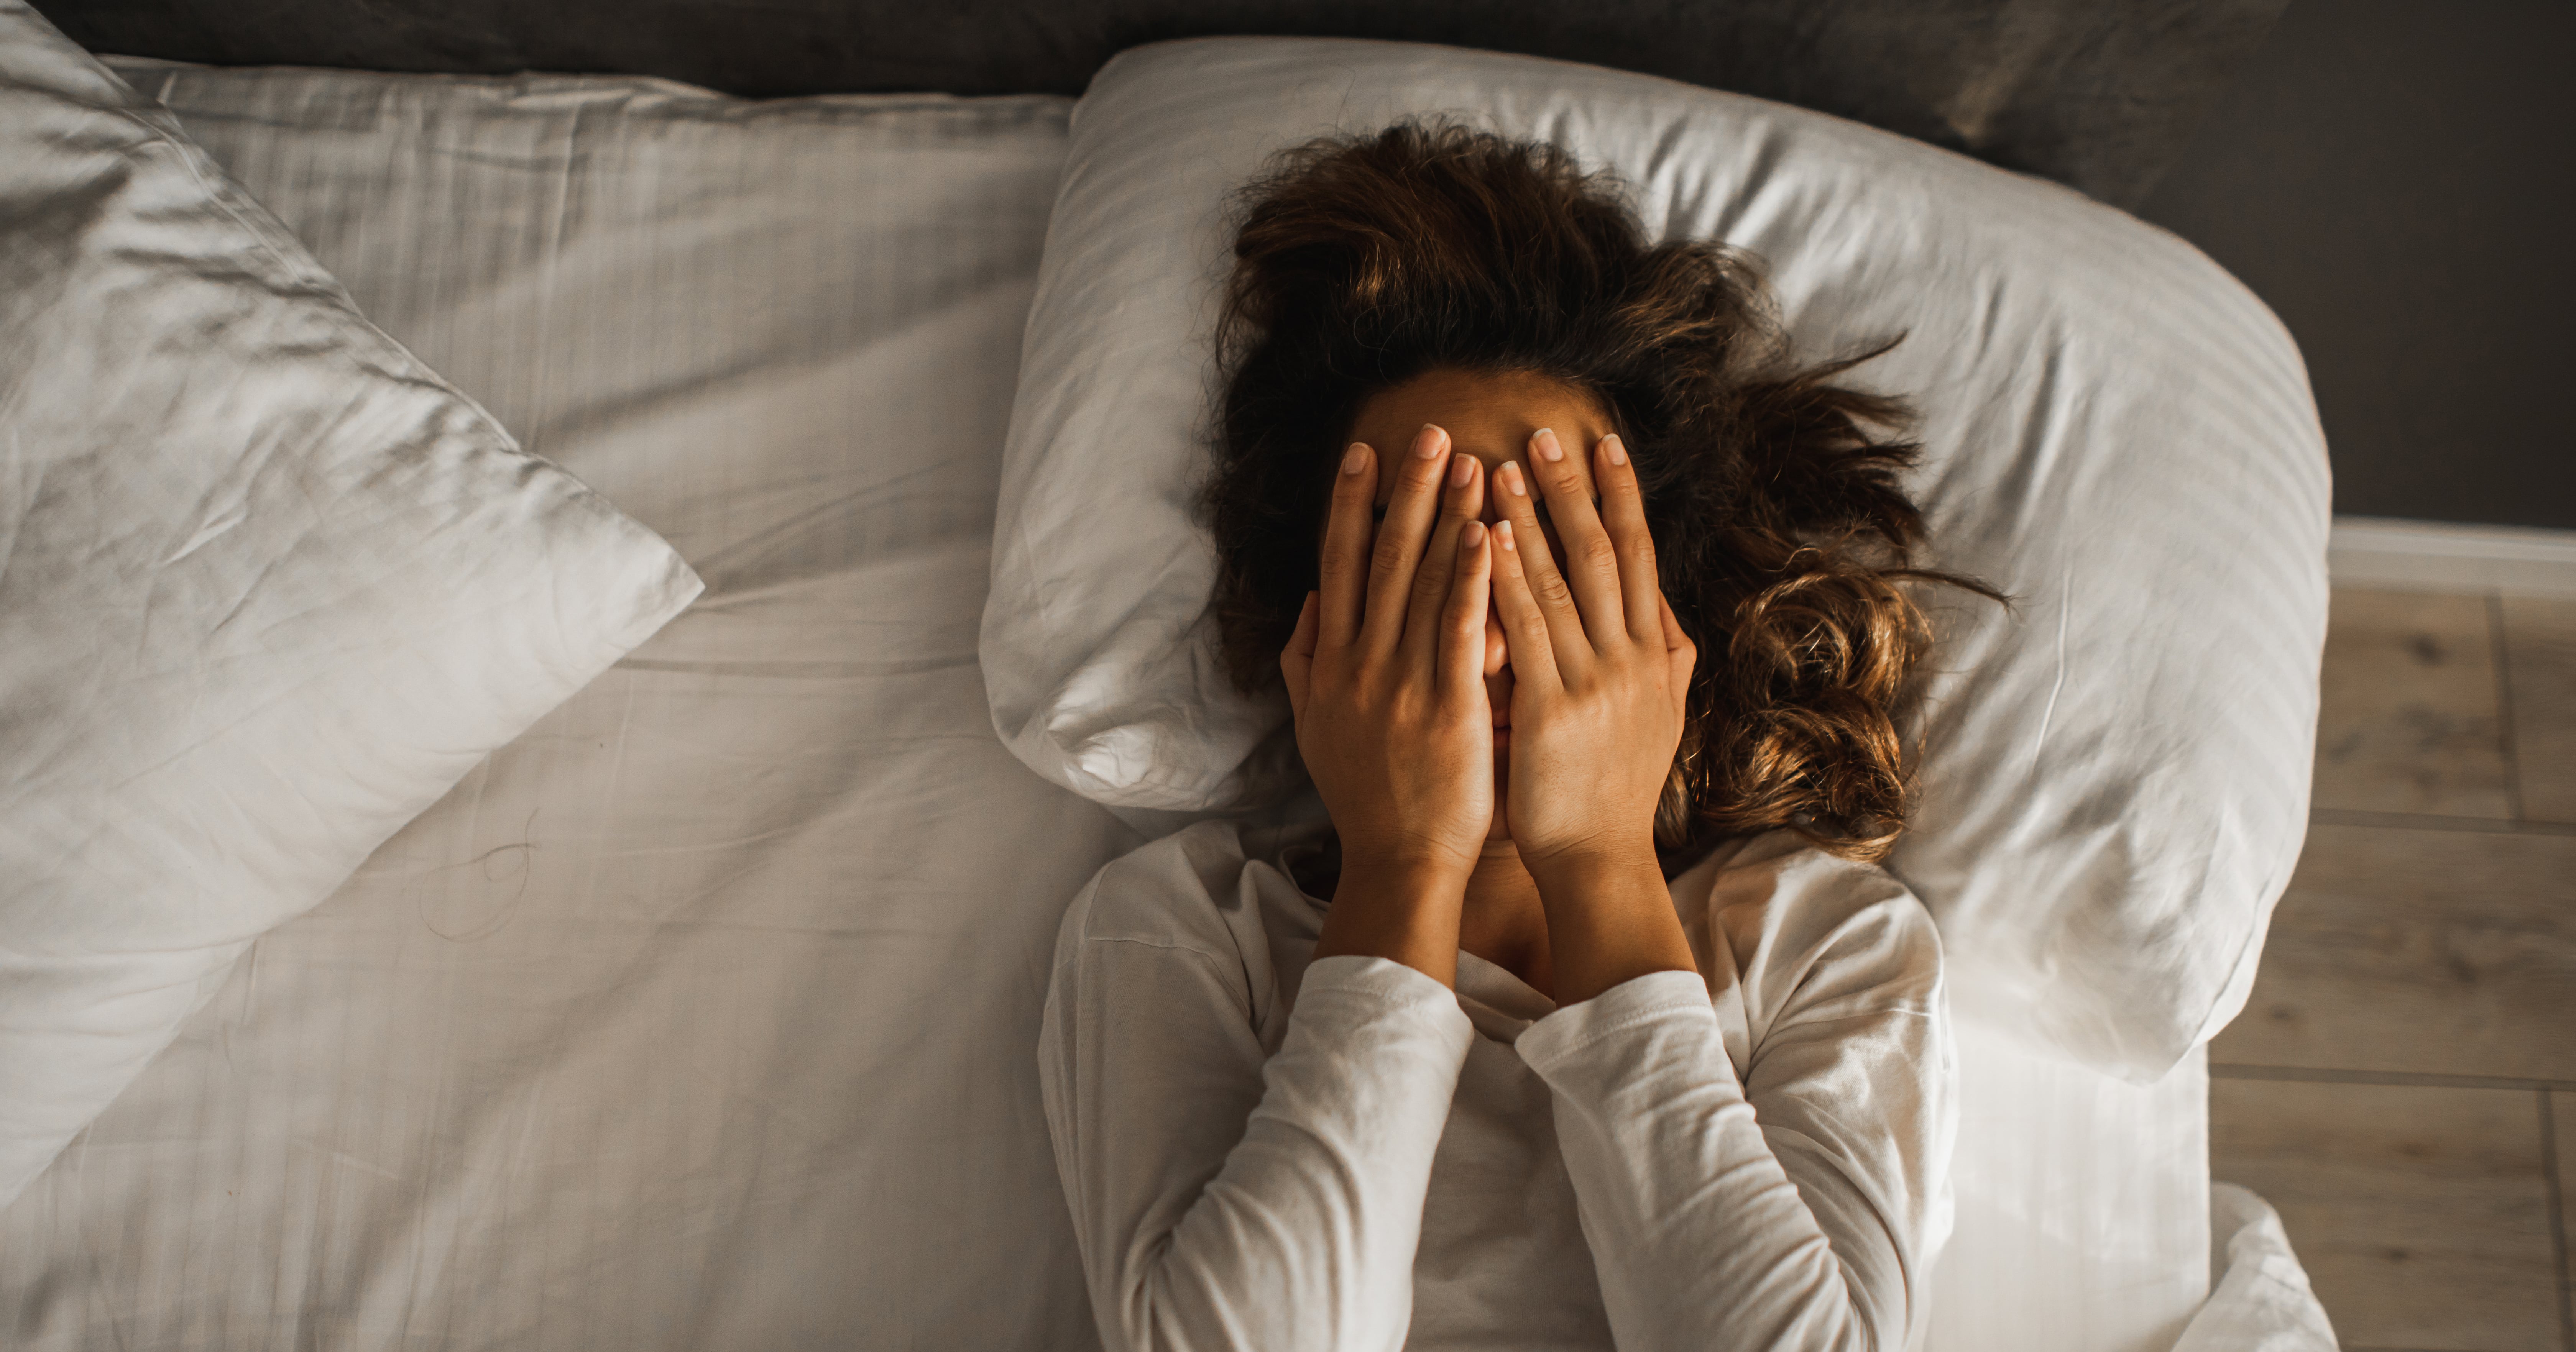 Yes, Anxiety Can Cause Bad Dreams - Here's How to Stop Them